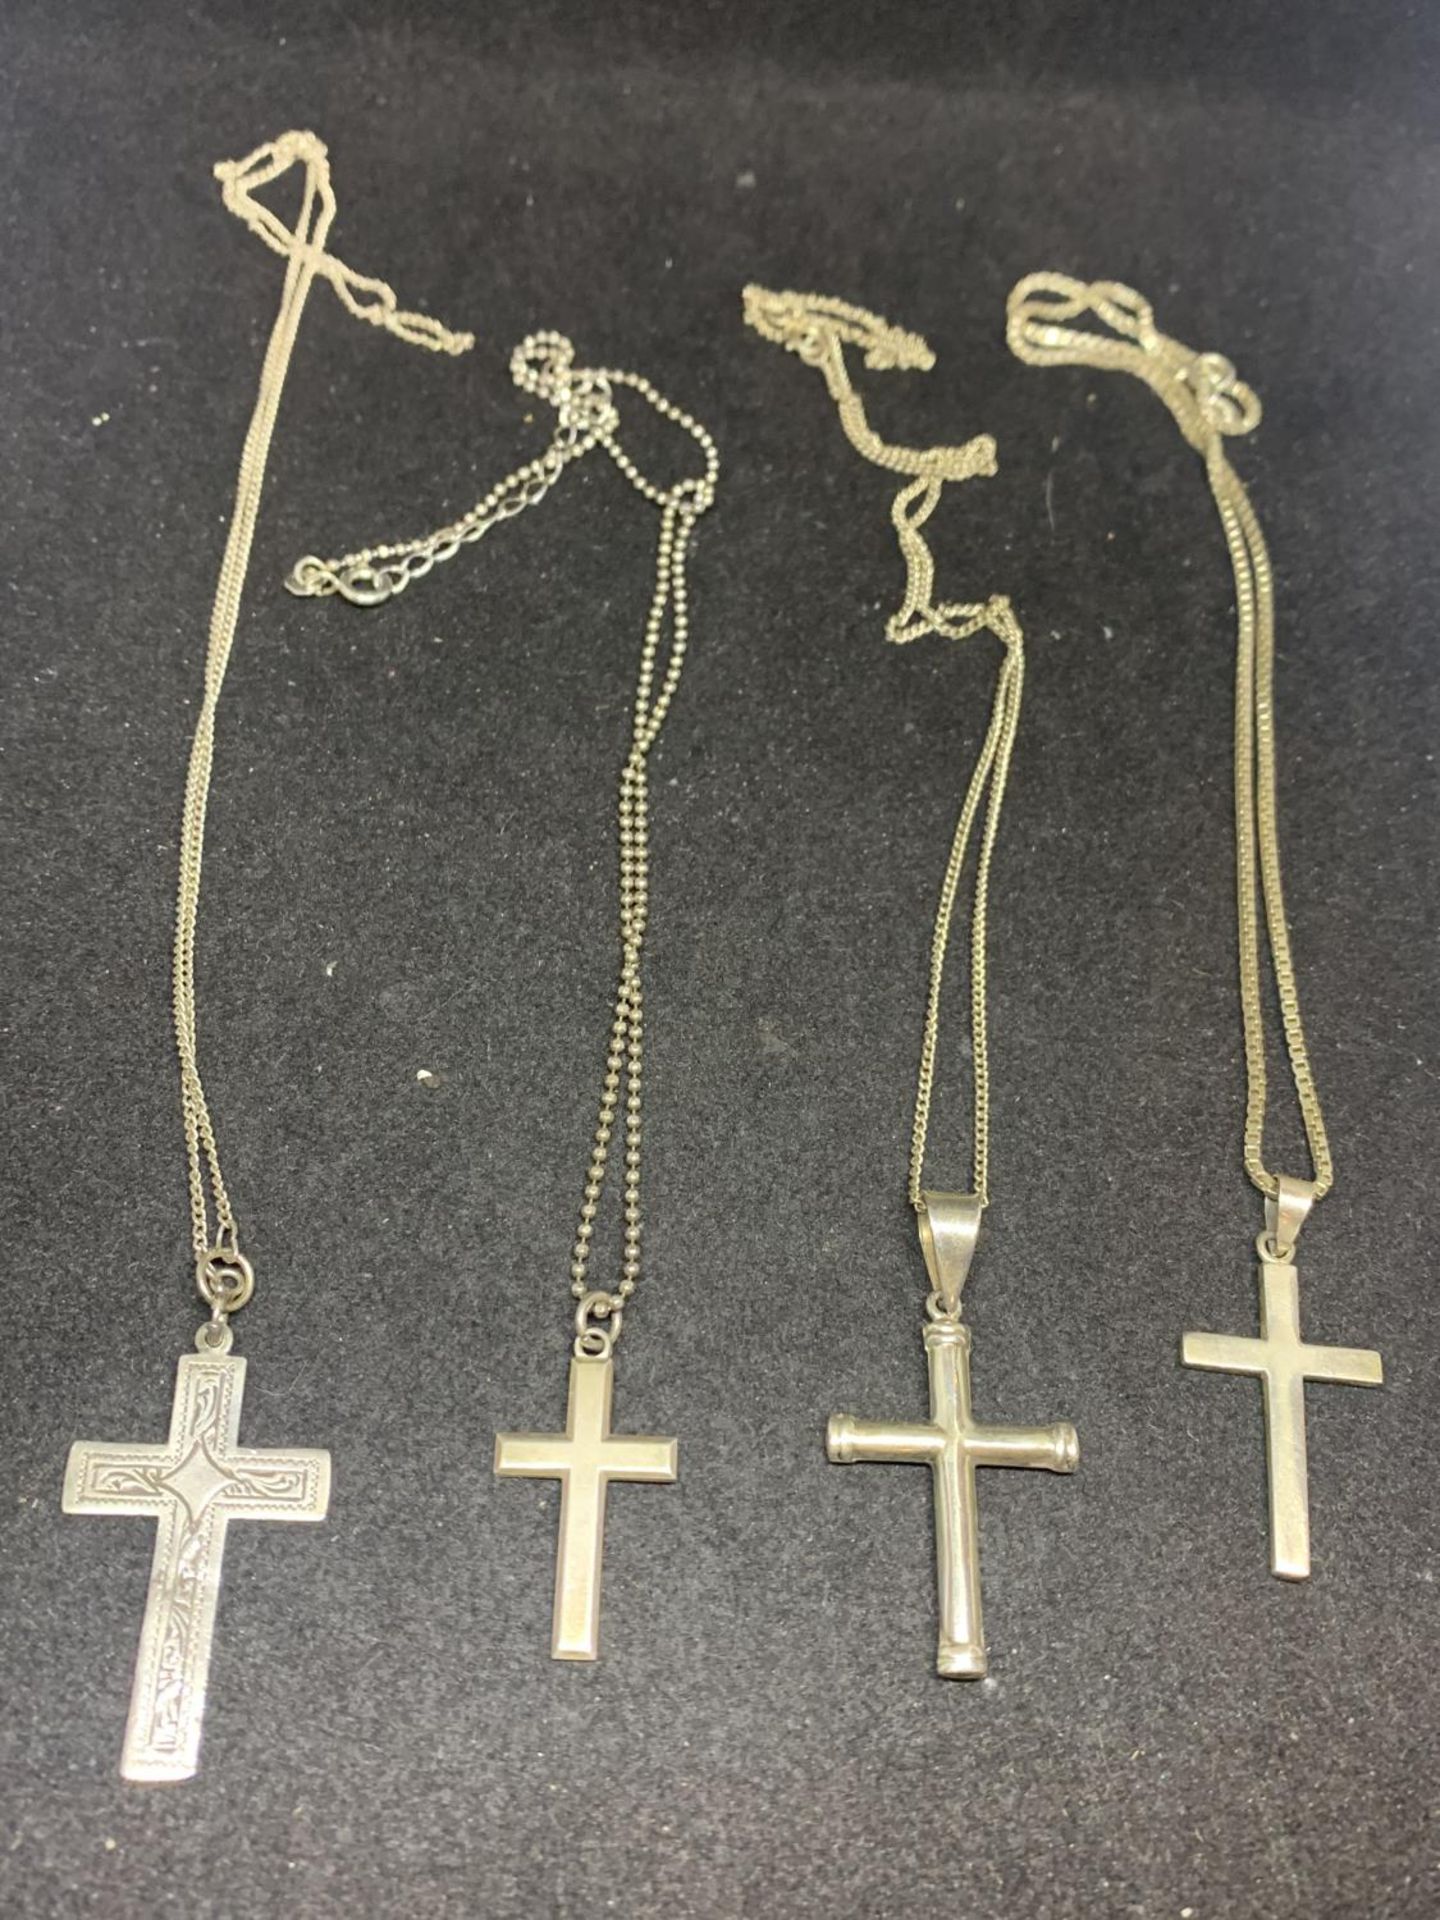 FOUR SILVER CHAINS WITH VARIOUS CROSS PENDANTS